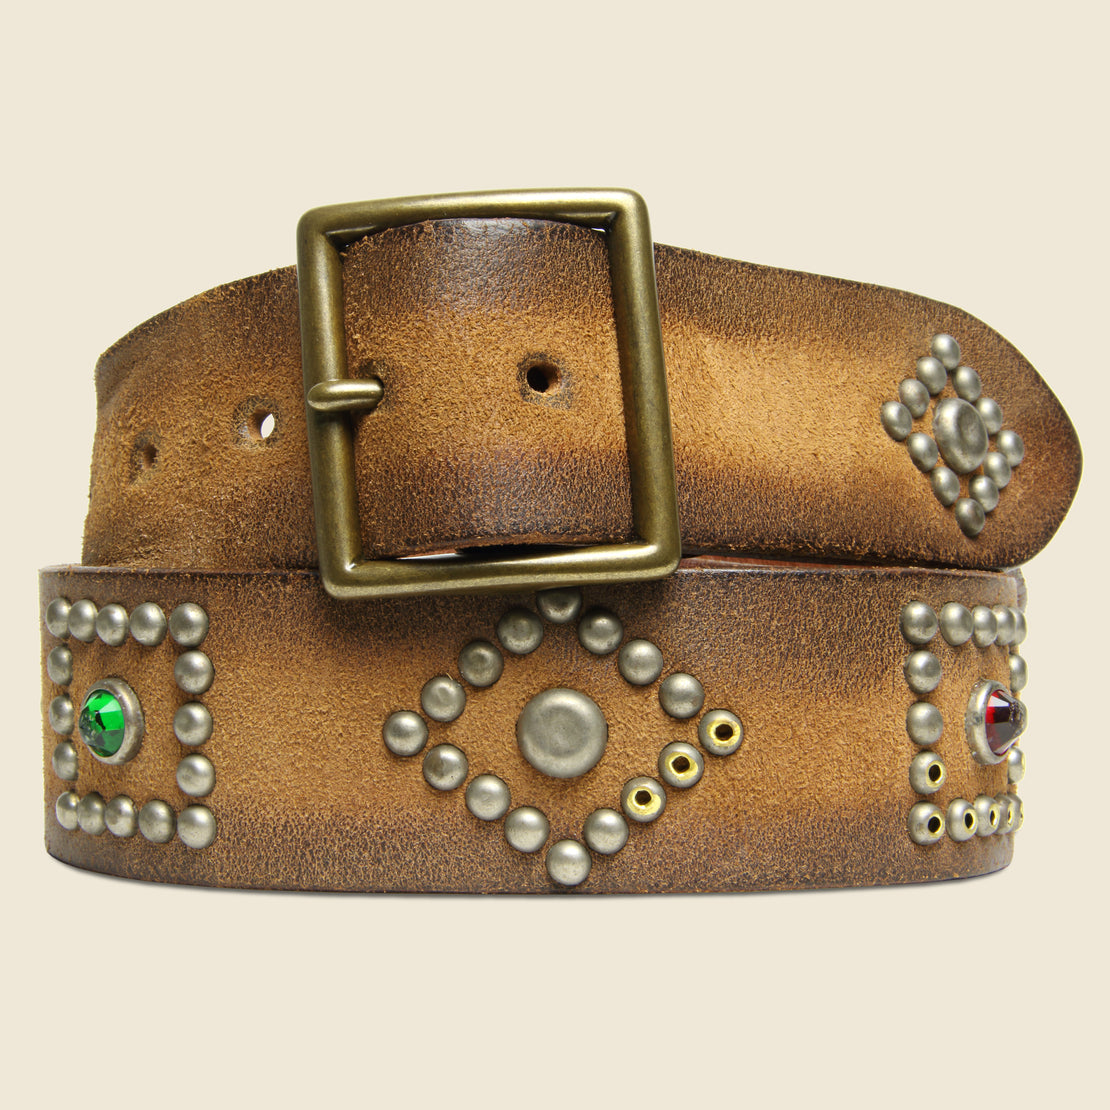 Roughout Studded Suede Belt - Brown